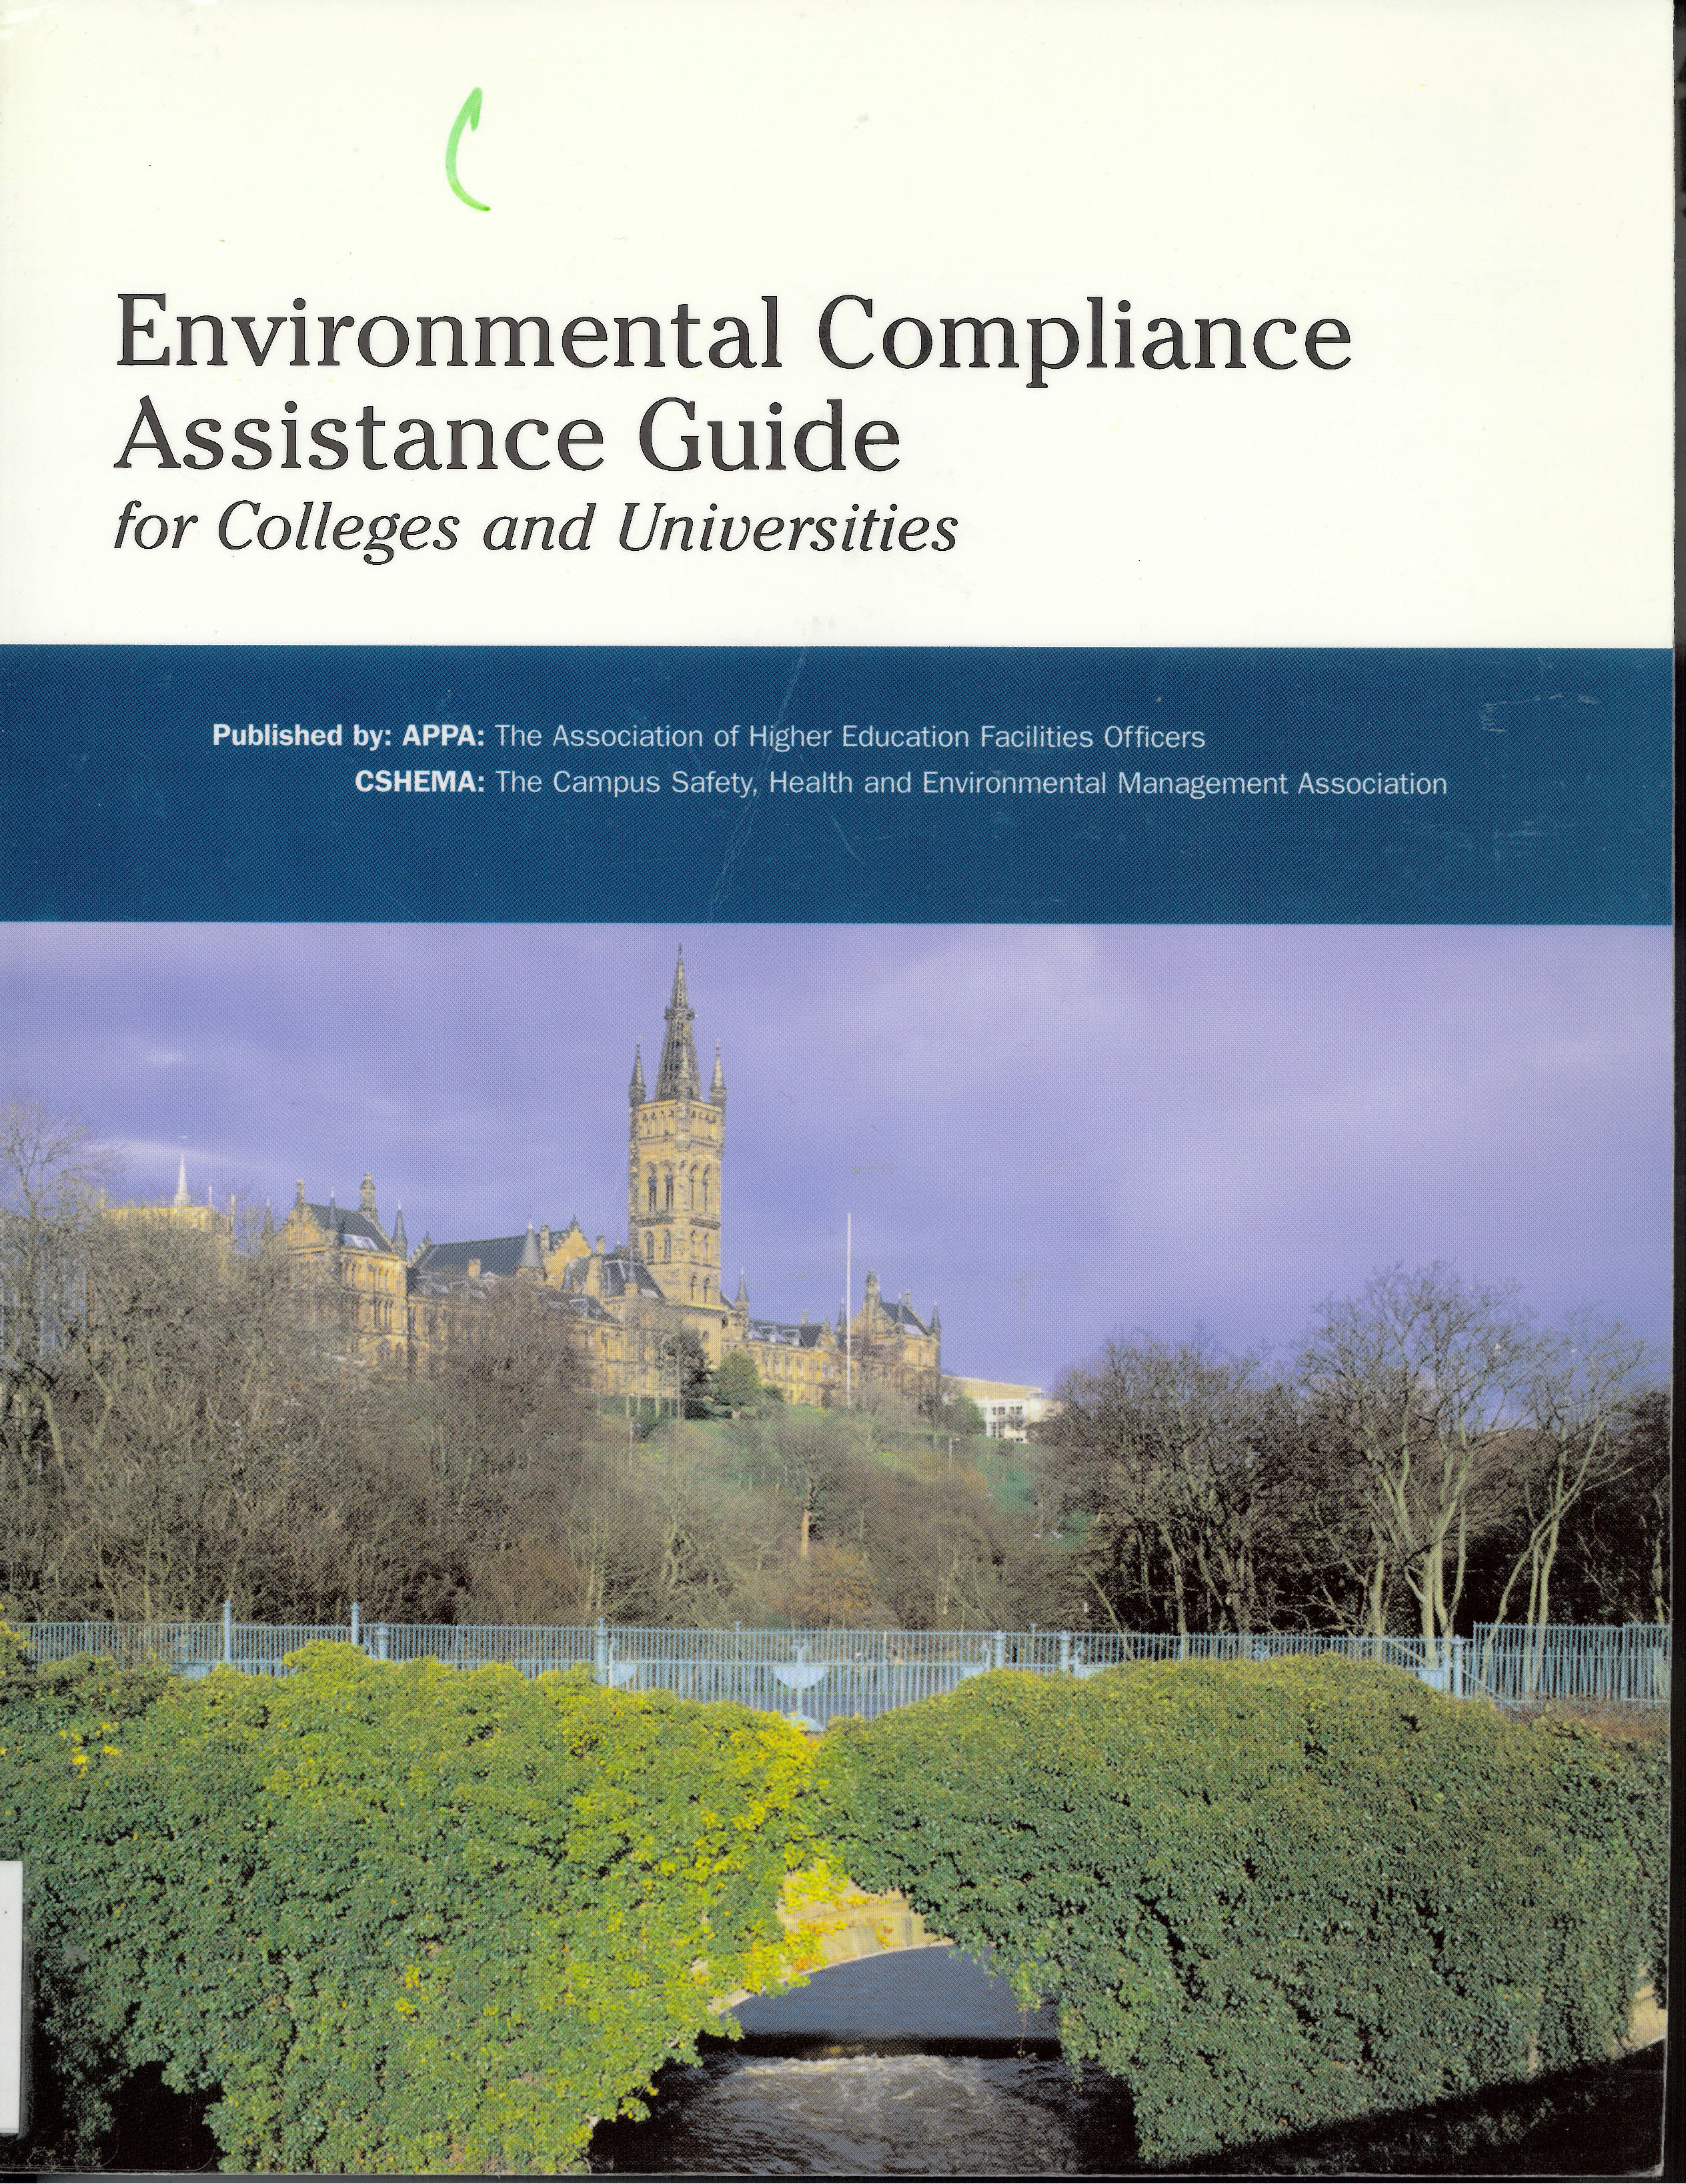 Environmental compliance assistance guide for colleges and universities